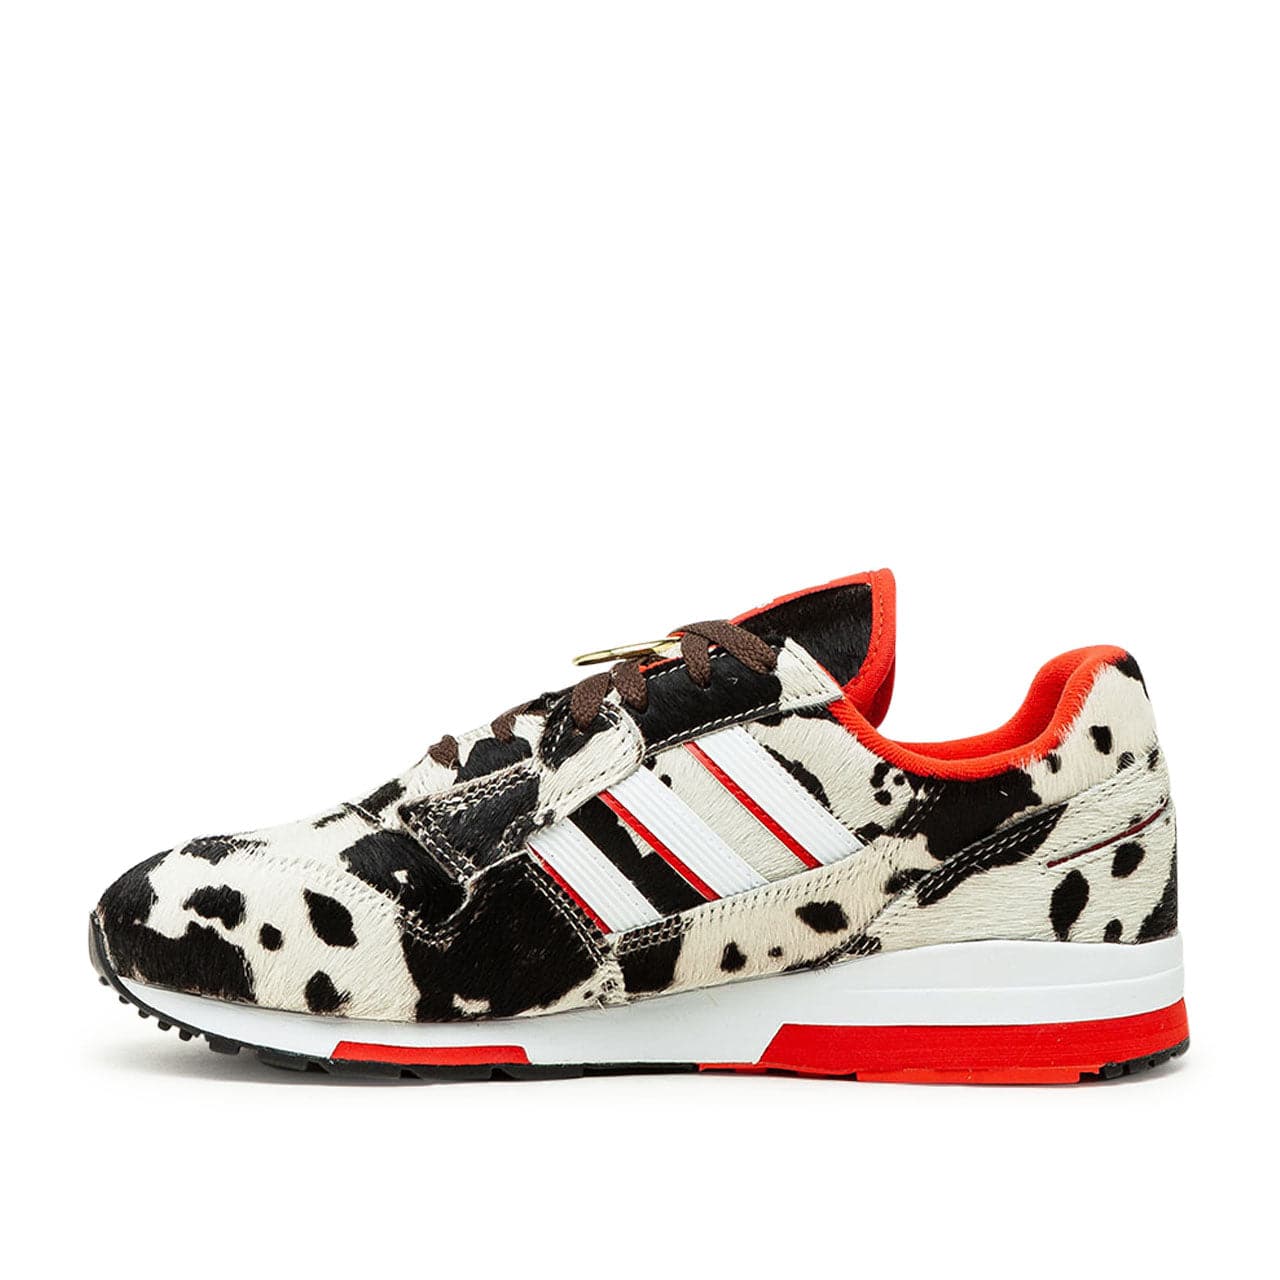 adidas ZX 420 'Year of the Ox' (White / Black / Red)